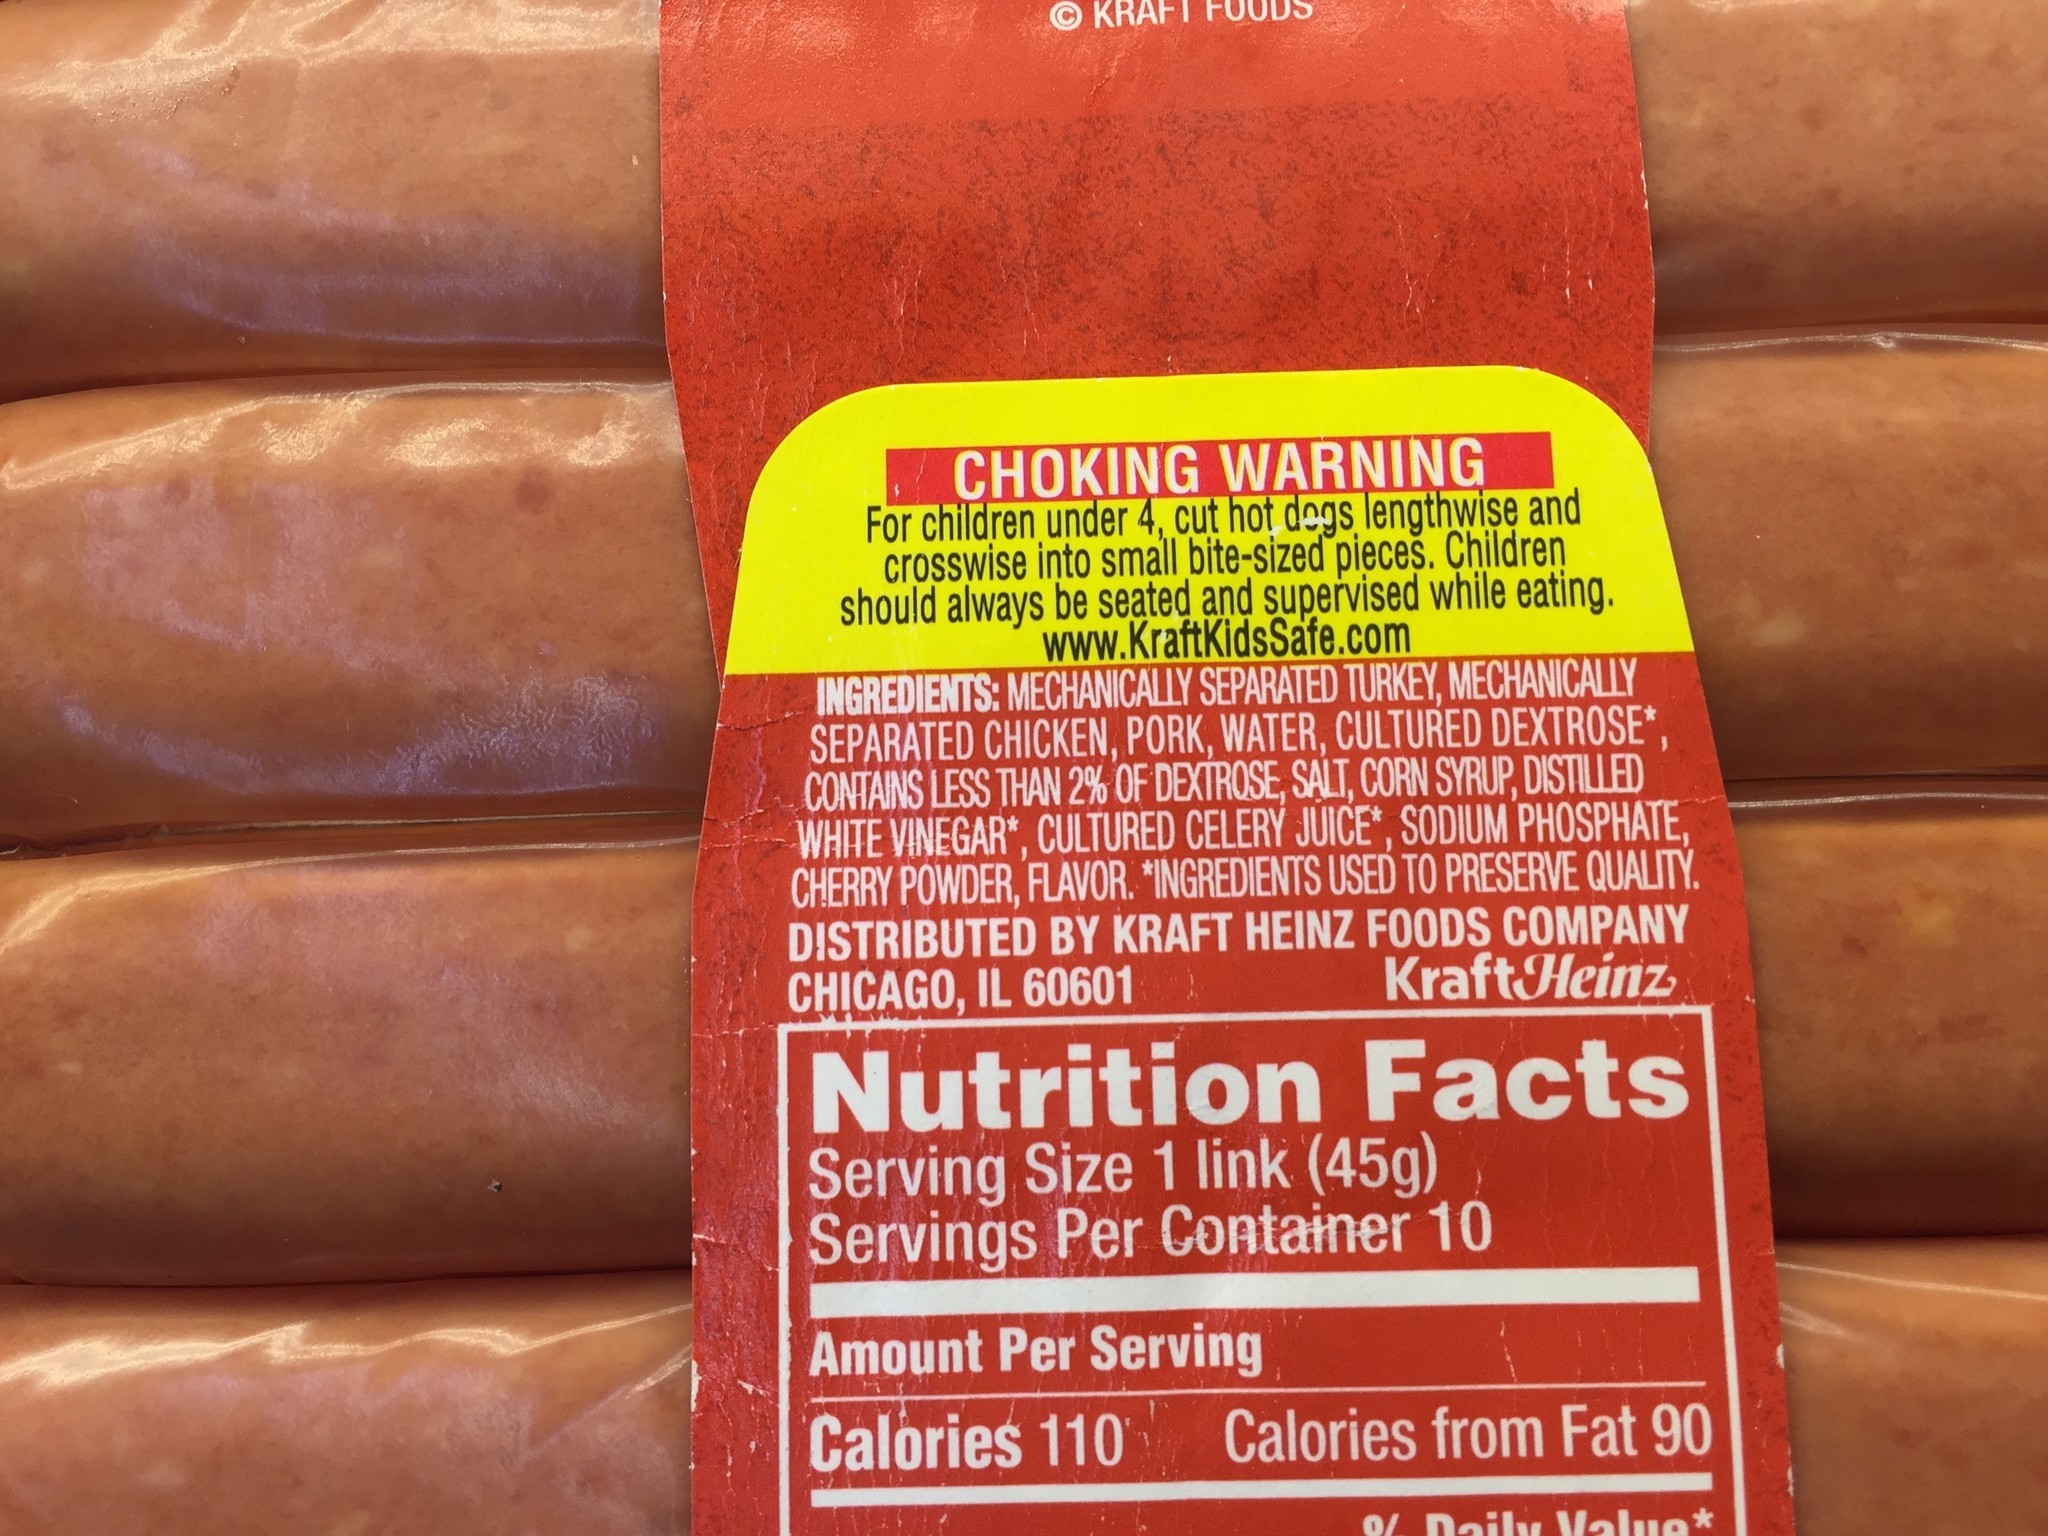 Experts say hot dogs minus artificial nitrites may be no